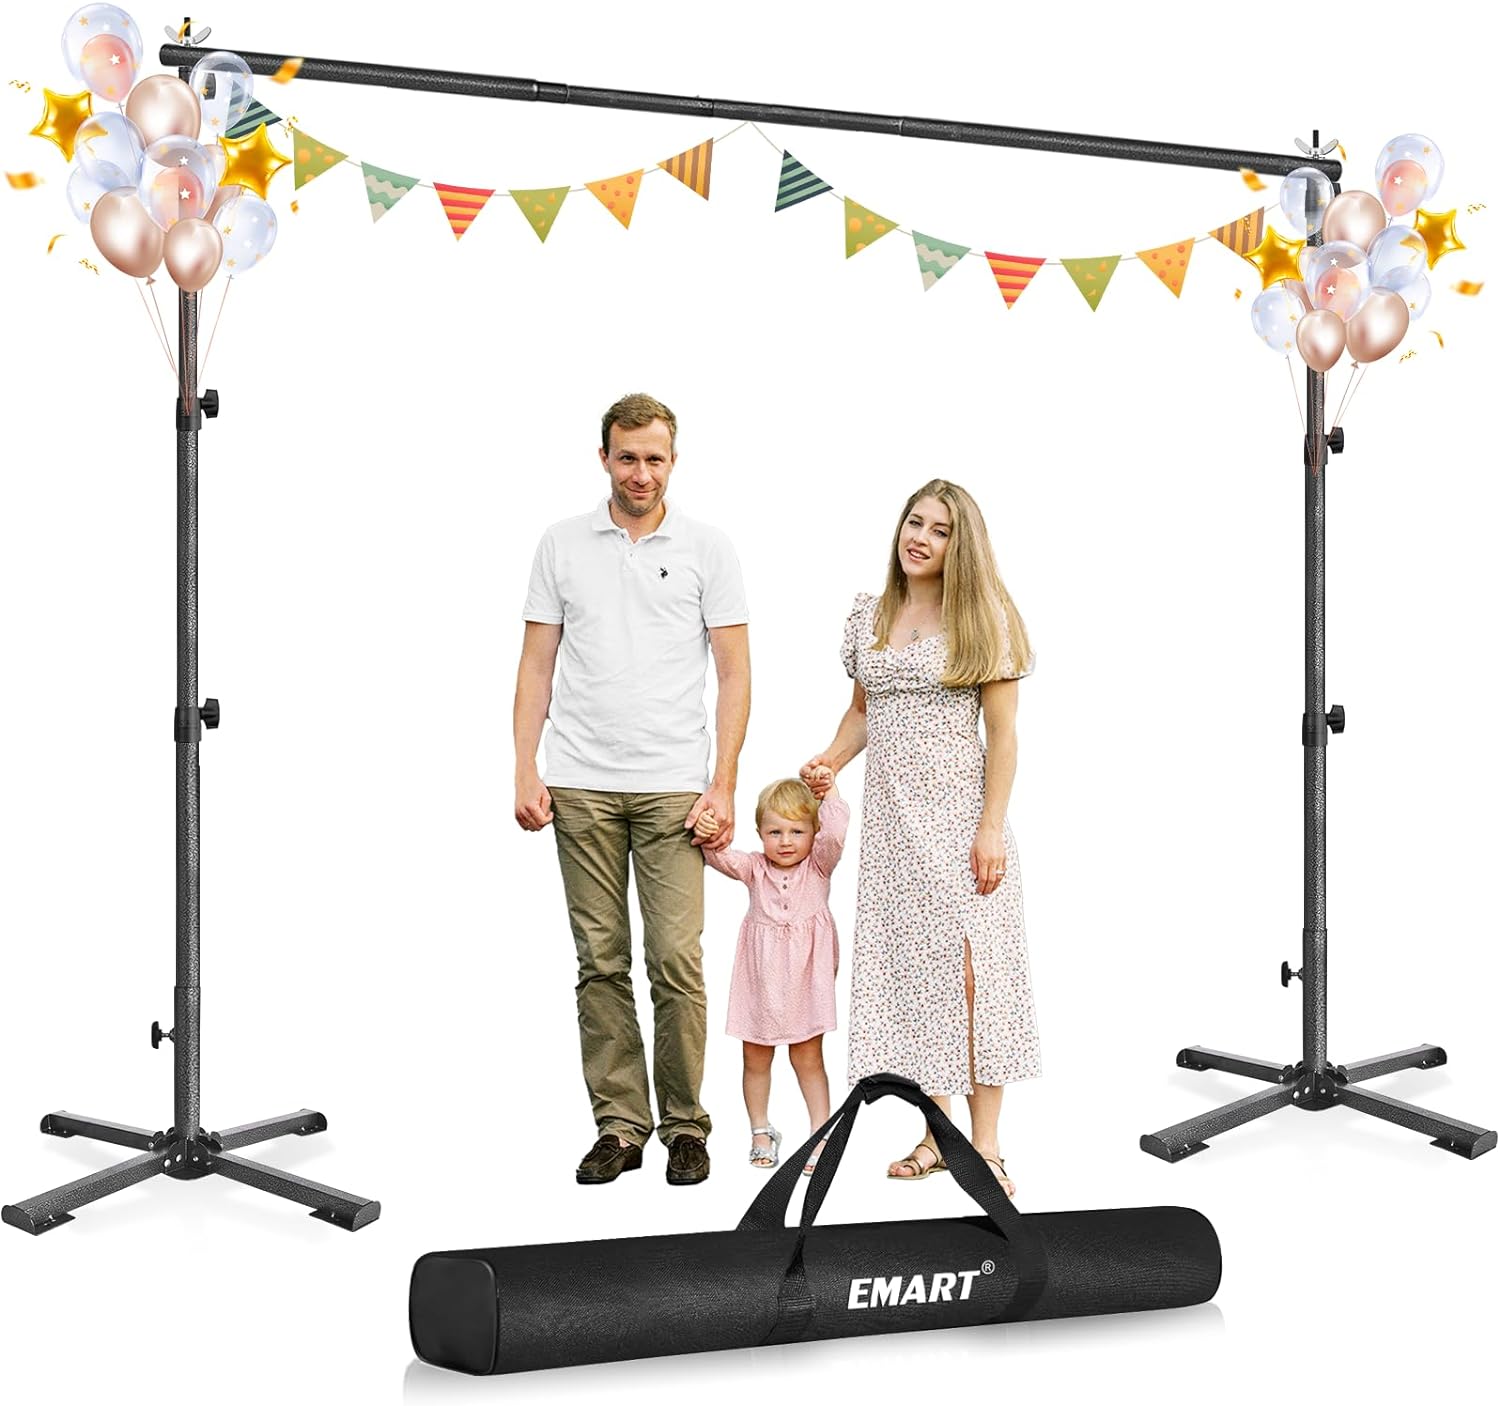 8.5 x 10 ft Four-Legged Photo Backdrop Stand Kit with Foldable Cross Base